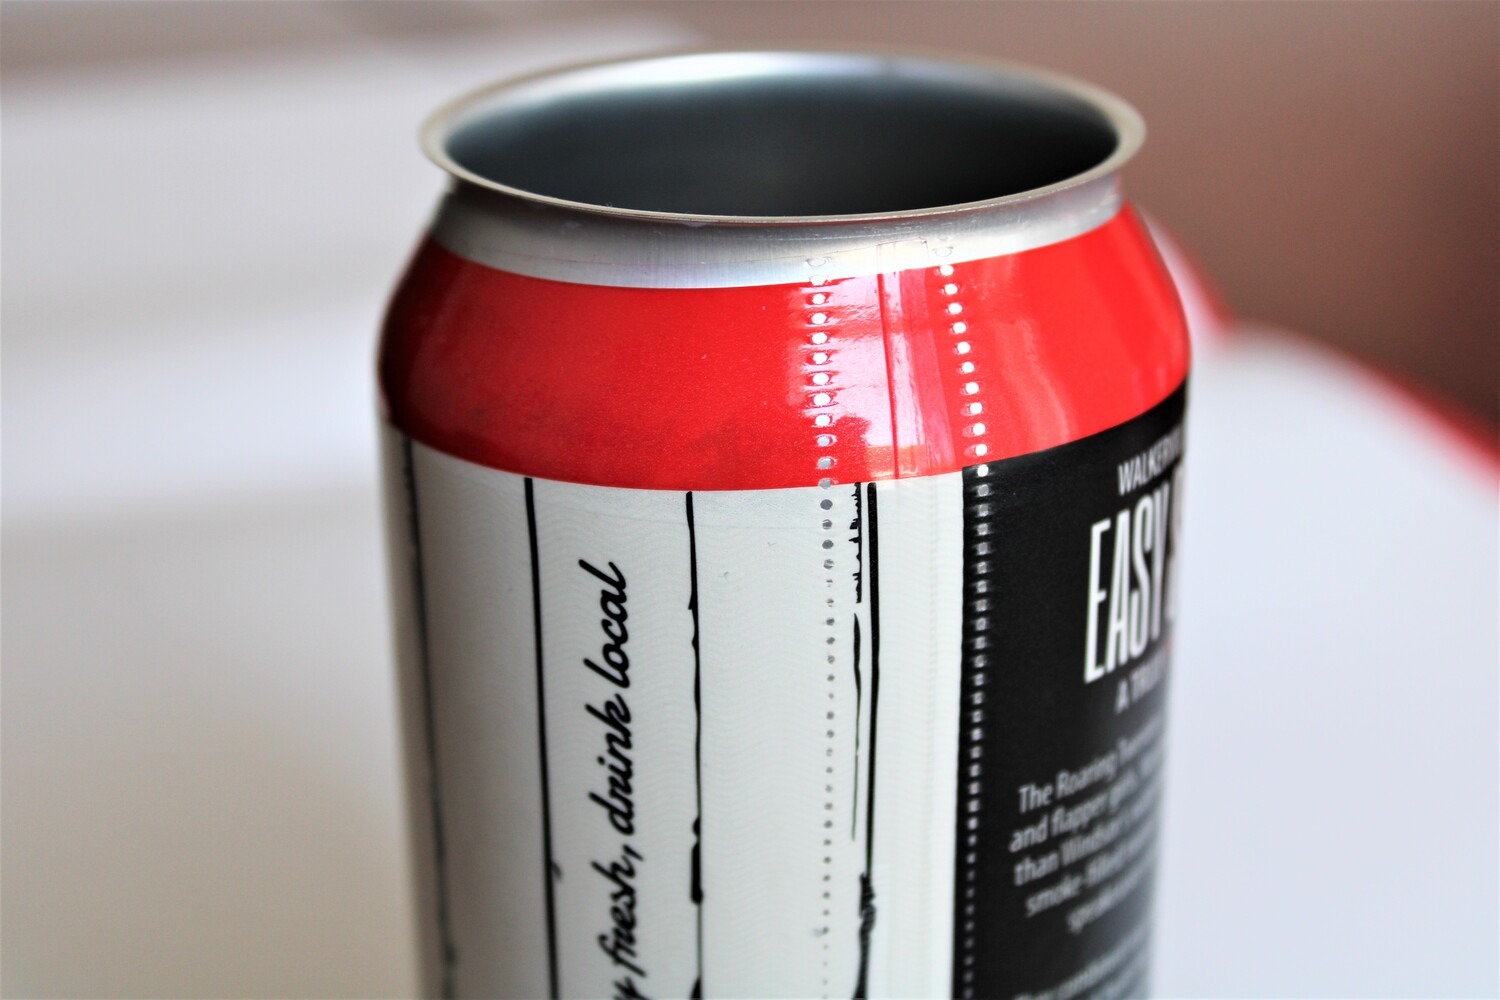 Shrink sleeves vs printed cans: which option should you pick?